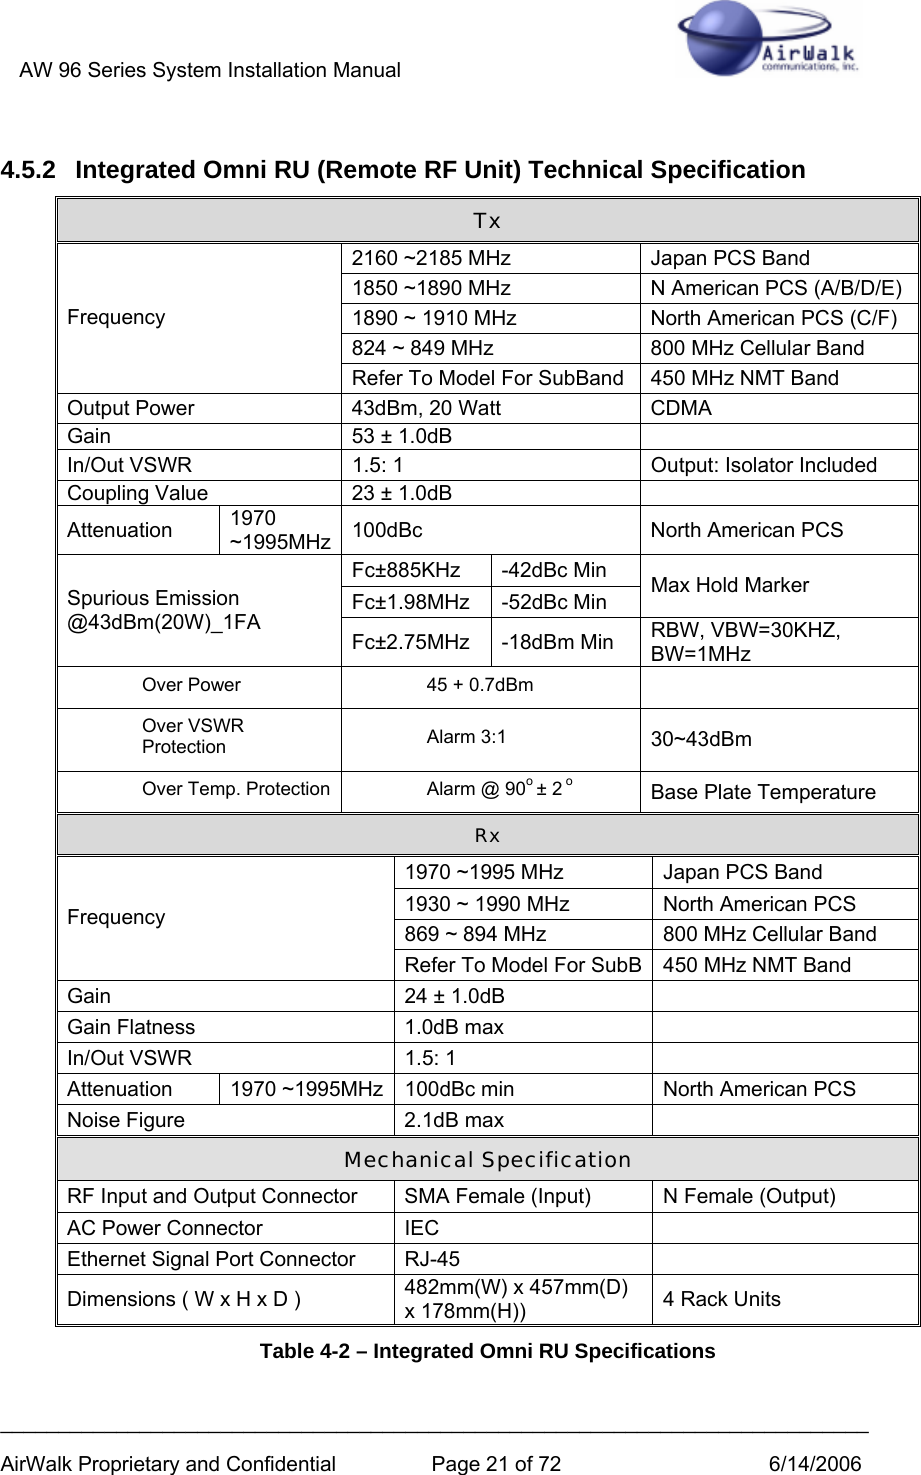 AW 96 Series System Installation Manual          ___________________________________________________________________________ AirWalk Proprietary and Confidential  Page 21 of 72  6/14/2006 4.5.2  Integrated Omni RU (Remote RF Unit) Technical Specification Tx 2160 ~2185 MHz  Japan PCS Band 1850 ~1890 MHz  N American PCS (A/B/D/E) 1890 ~ 1910 MHz  North American PCS (C/F) 824 ~ 849 MHz  800 MHz Cellular Band Frequency Refer To Model For SubBand  450 MHz NMT Band Output Power  43dBm, 20 Watt  CDMA Gain  53 ± 1.0dB   In/Out VSWR  1.5: 1  Output: Isolator Included Coupling Value  23 ± 1.0dB   Attenuation  1970 ~1995MHz 100dBc  North American PCS Fc±885KHz -42dBc Min Fc±1.98MHz -52dBc Min  Max Hold Marker  Spurious Emission @43dBm(20W)_1FA Fc±2.75MHz -18dBm Min  RBW, VBW=30KHZ, BW=1MHz Over Power  45 + 0.7dBm   Over VSWR Protection  Alarm 3:1  30~43dBm Over Temp. Protection  Alarm @ 90o ± 2 o Base Plate Temperature Rx 1970 ~1995 MHz  Japan PCS Band 1930 ~ 1990 MHz  North American PCS 869 ~ 894 MHz  800 MHz Cellular Band Frequency Refer To Model For SubB 450 MHz NMT Band Gain   24 ± 1.0dB   Gain Flatness  1.0dB max   In/Out VSWR  1.5: 1    Attenuation  1970 ~1995MHz 100dBc min  North American PCS Noise Figure  2.1dB max   Mechanical Specification RF Input and Output Connector  SMA Female (Input)  N Female (Output) AC Power Connector  IEC   Ethernet Signal Port Connector  RJ-45   Dimensions ( W x H x D )  482mm(W) x 457mm(D) x 178mm(H))  4 Rack Units Table 4-2 – Integrated Omni RU Specifications 